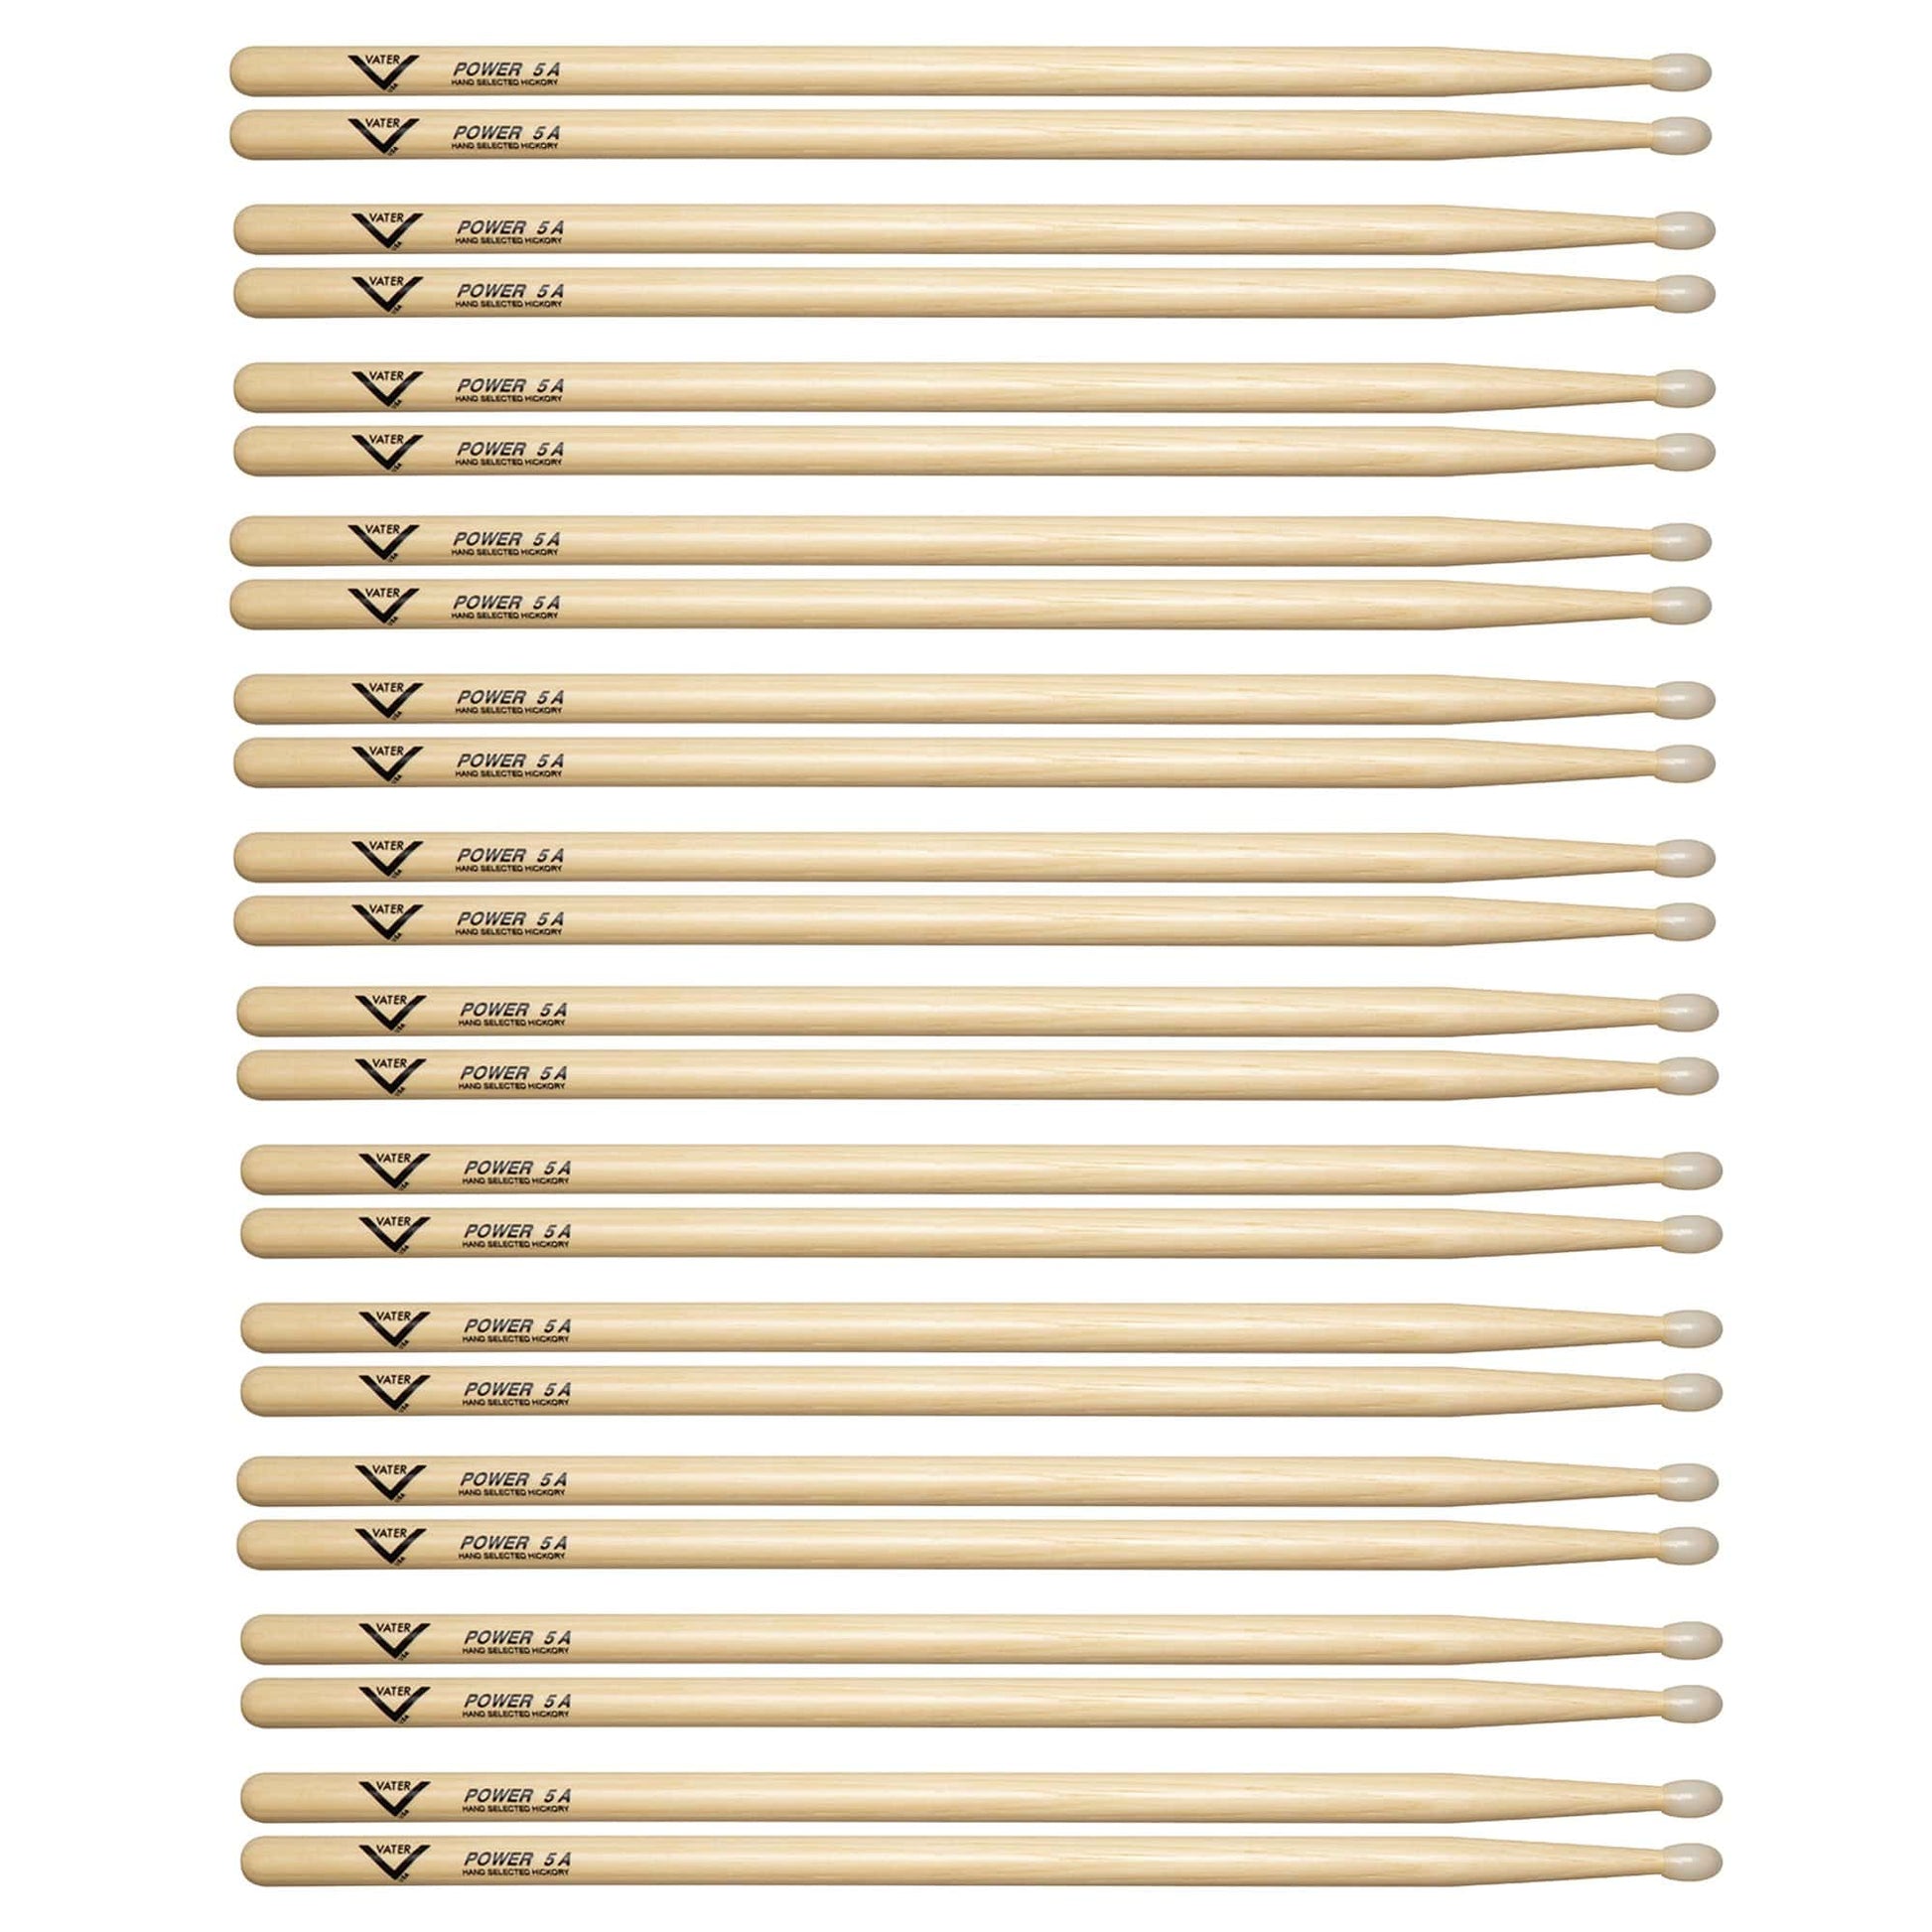 Vater Hickory Power 5A Nylon Tip Drum Sticks (12 Pair Bundle) Drums and Percussion / Parts and Accessories / Drum Sticks and Mallets